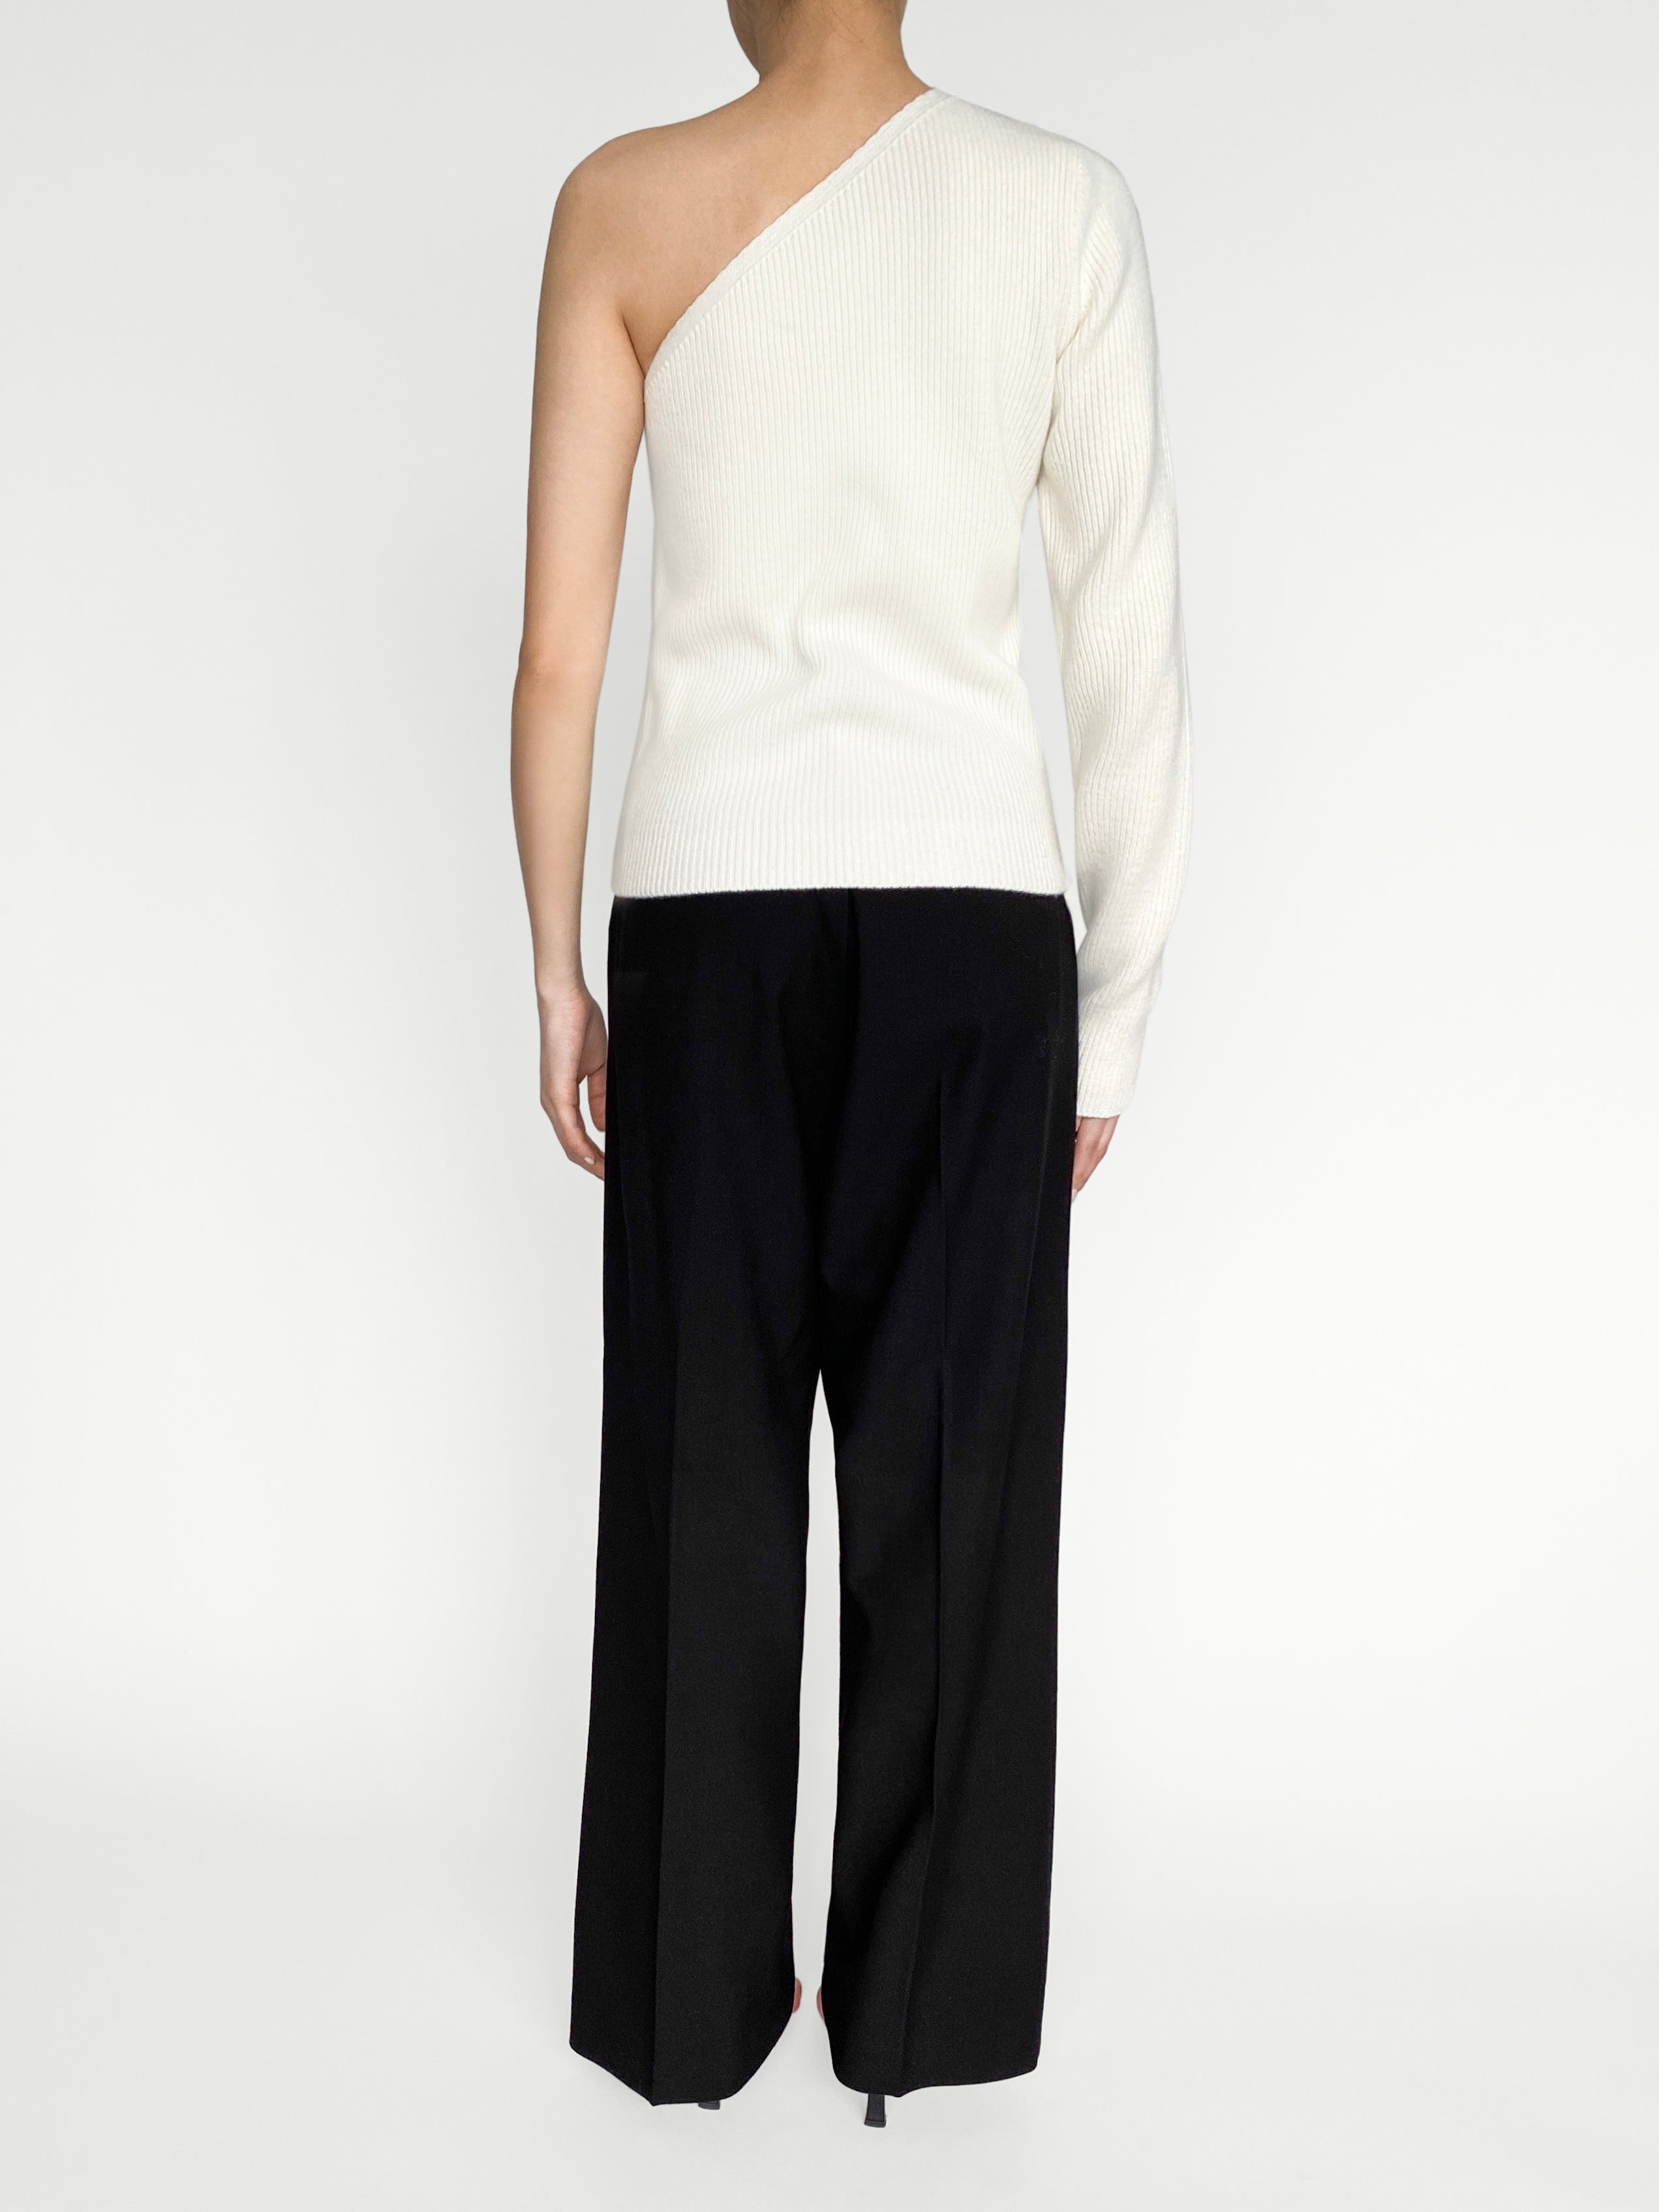 Naomi Wool Knit Top in Ivory